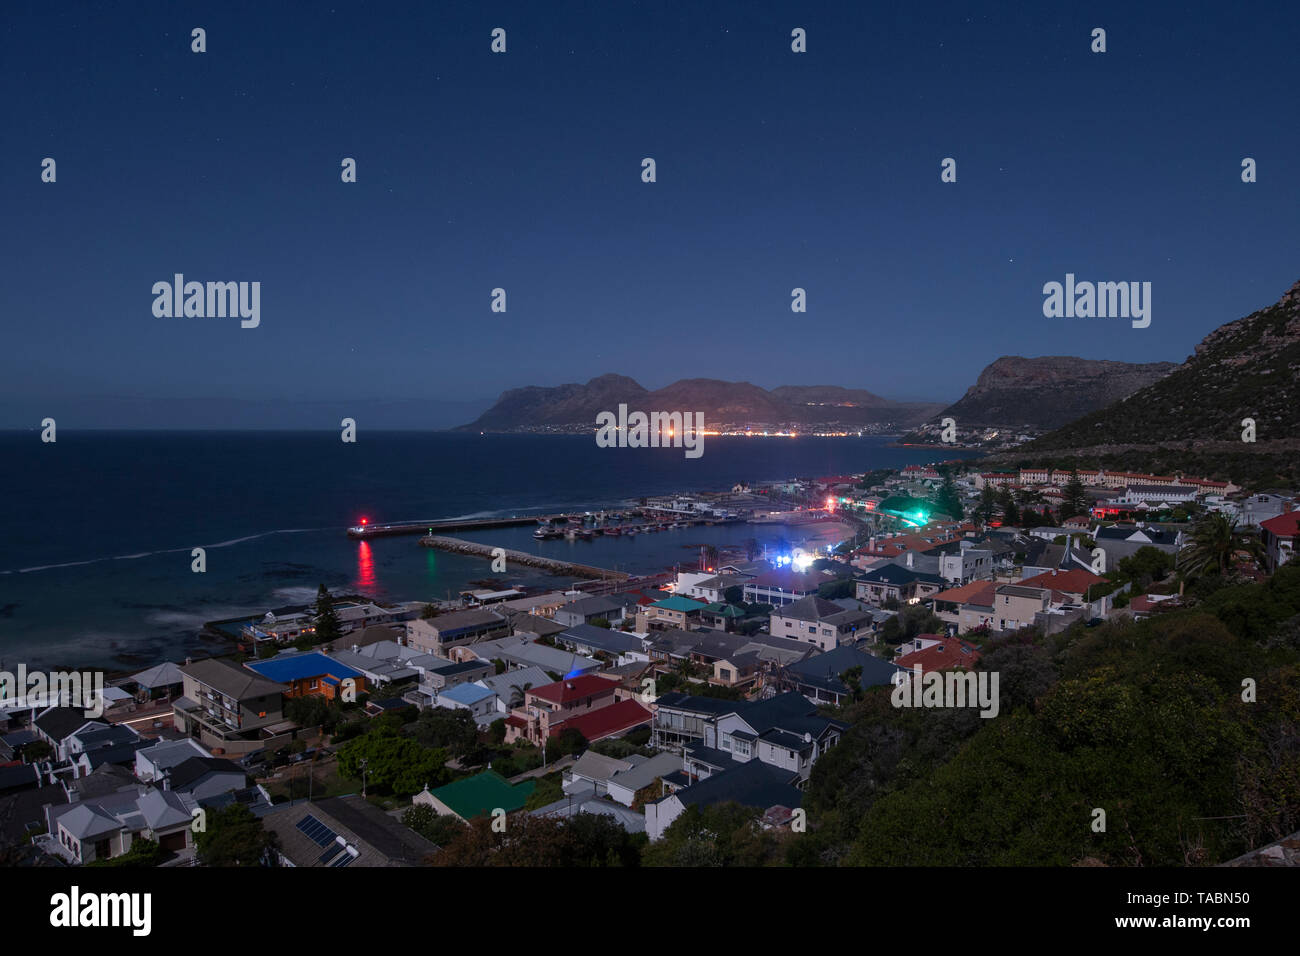 Night-time, moonlit view of Kalk Bay and its harbour during load-shedding (scheduled power cuts) in Cape Town, South Africa. Stock Photo